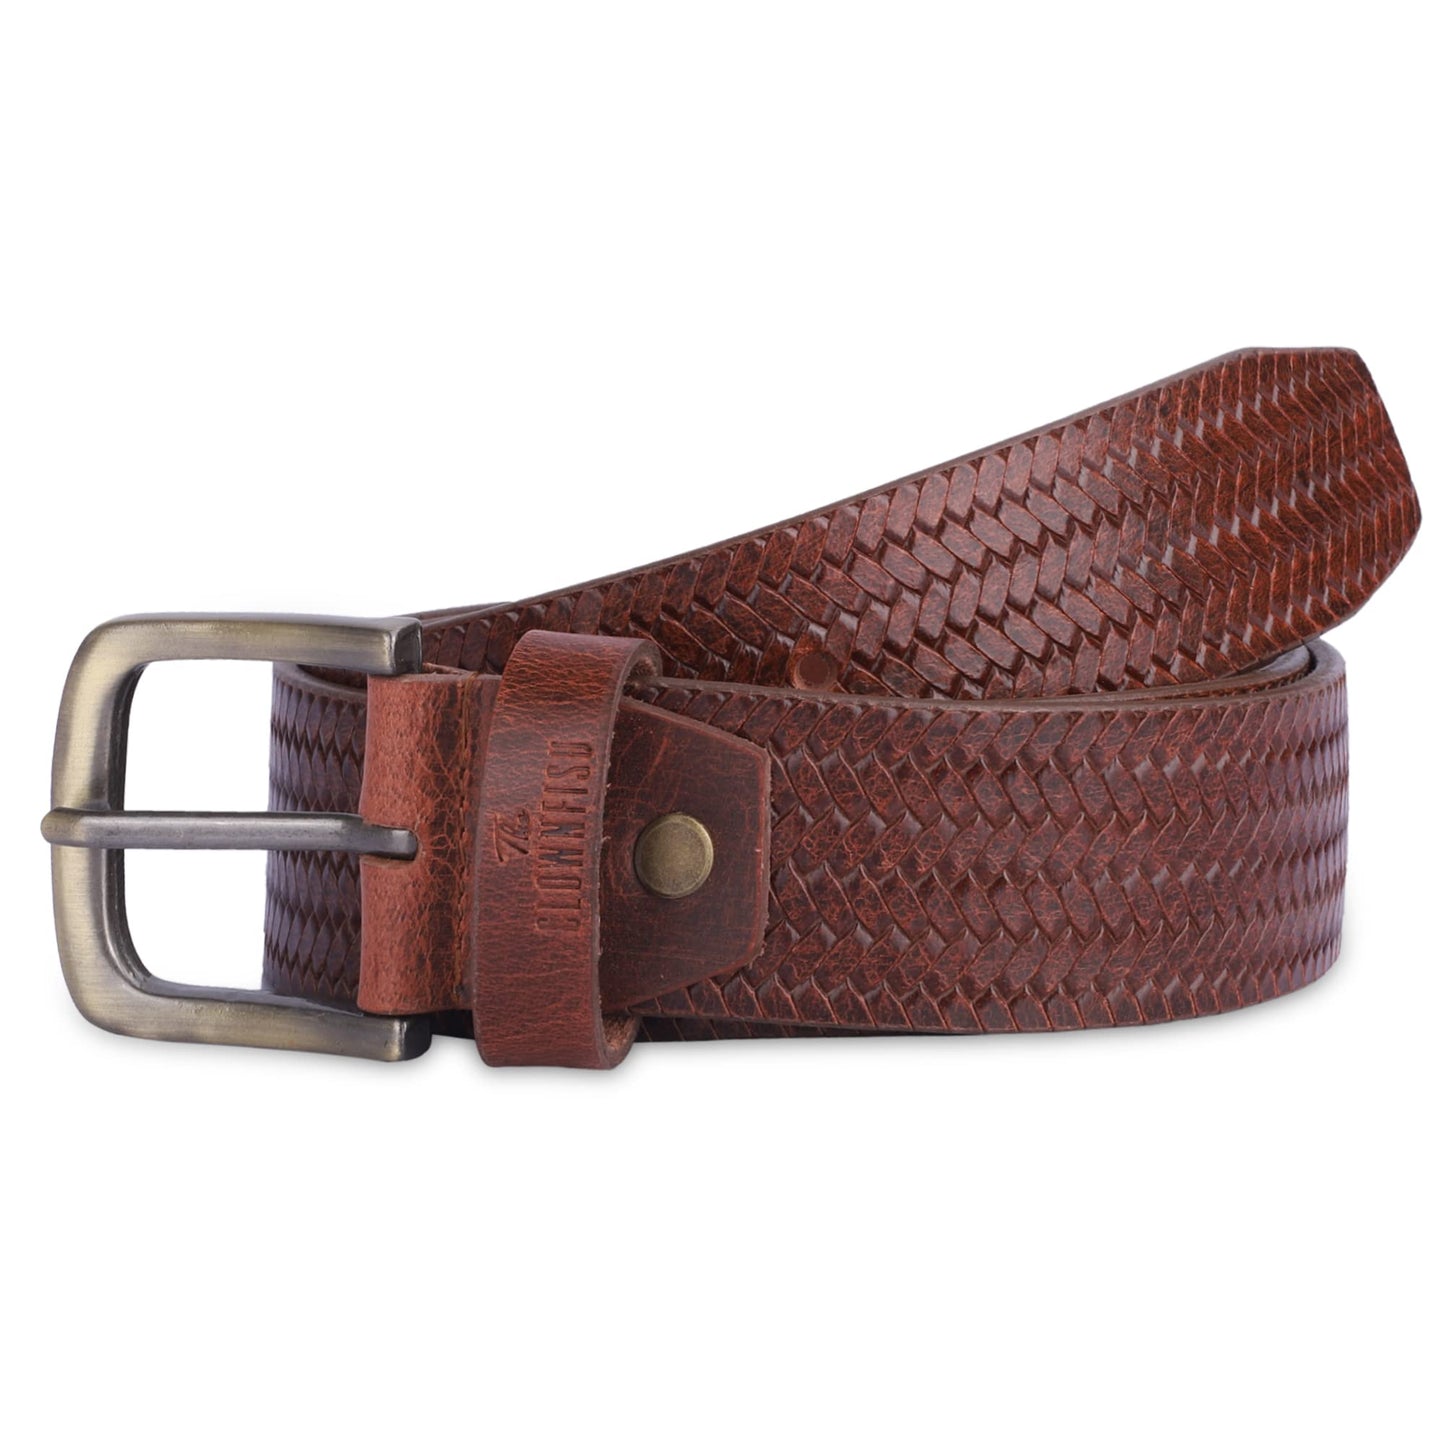 THE CLOWNFISH Men's Genuine Leather Belt with Textured/Embossed Design-Tan (Size-32 inches)